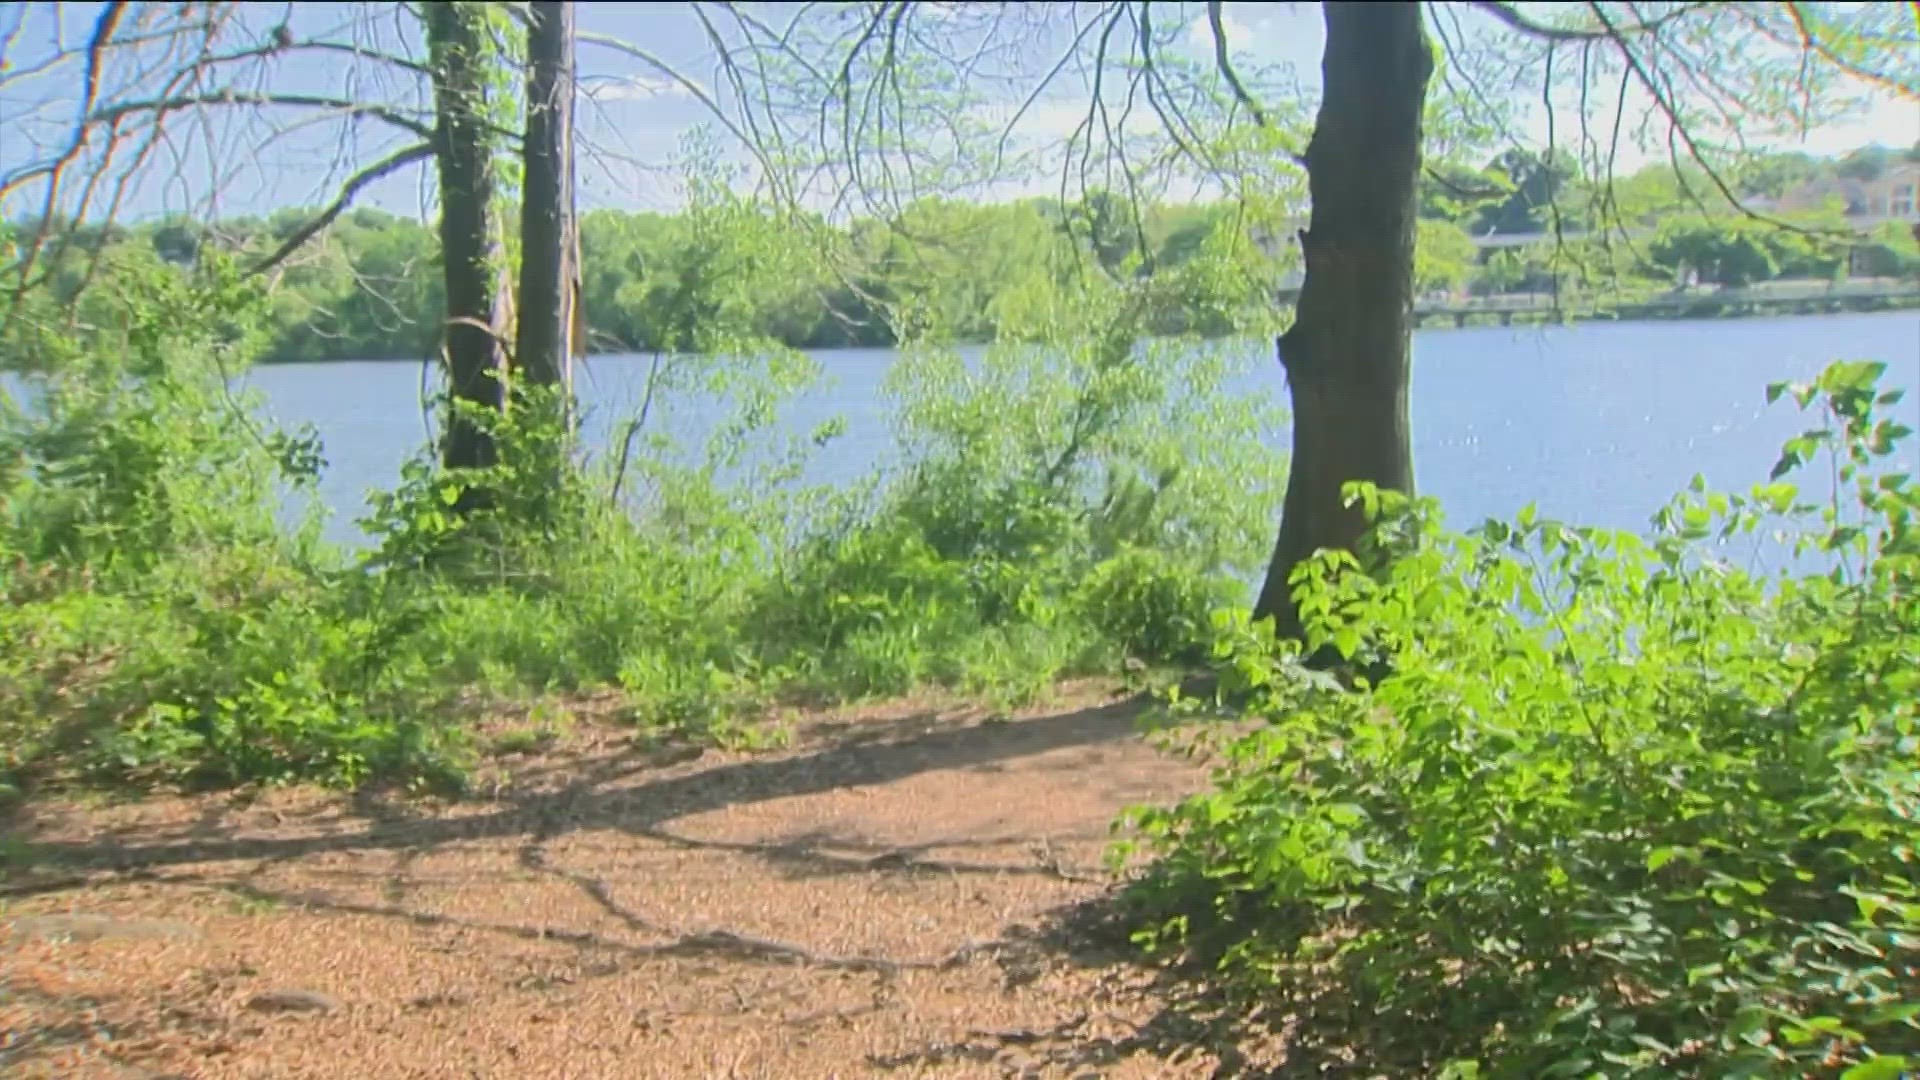 The move comes after calls for safety improvements in the area following two recent drowning deaths at Lady Bird Lake.